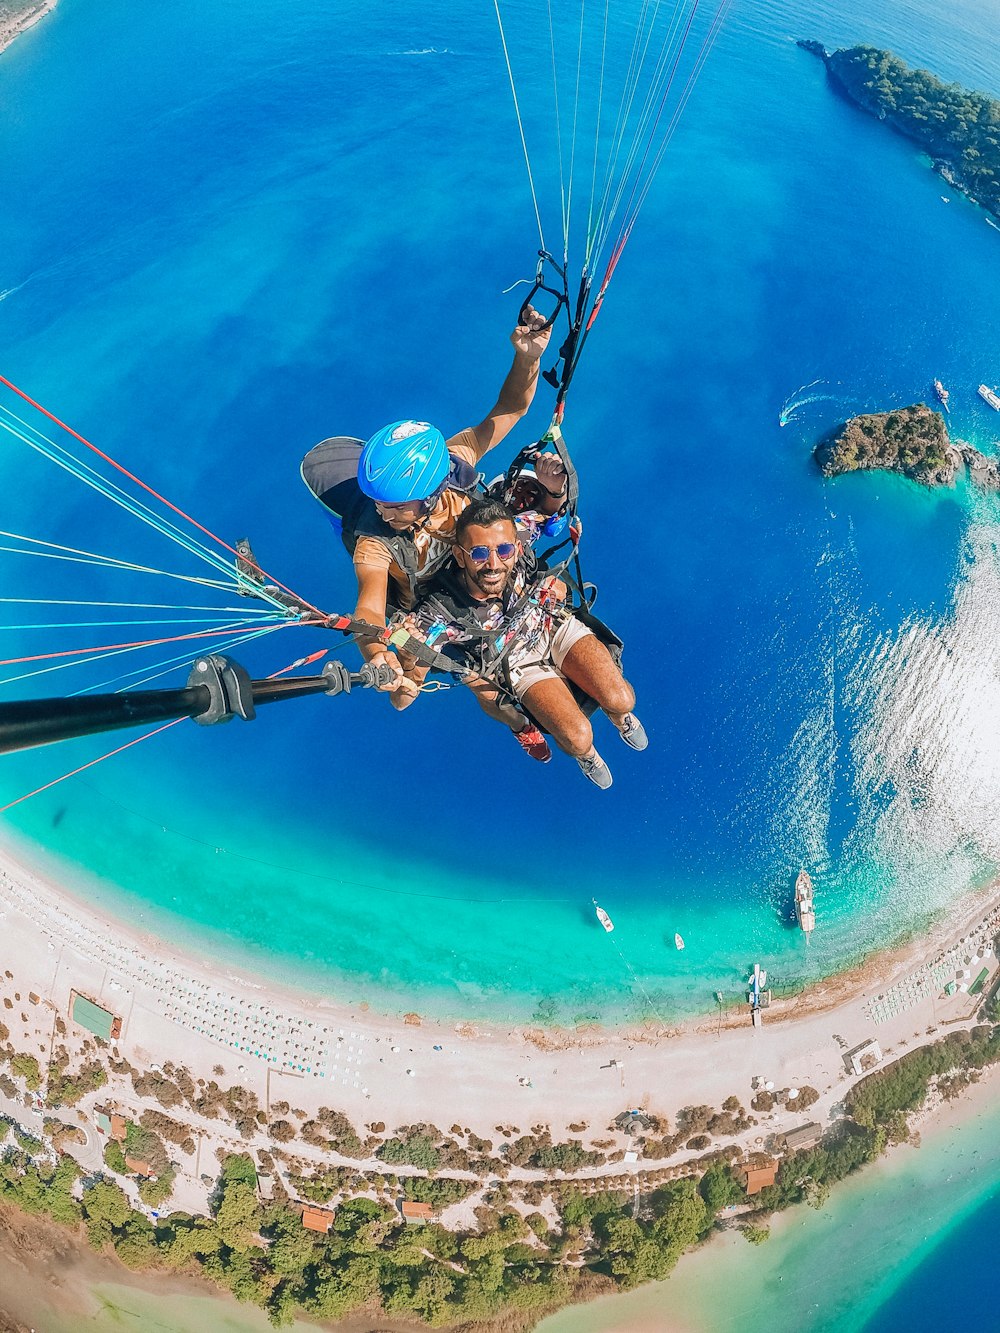 man in blue helmet riding on blue and white parachute